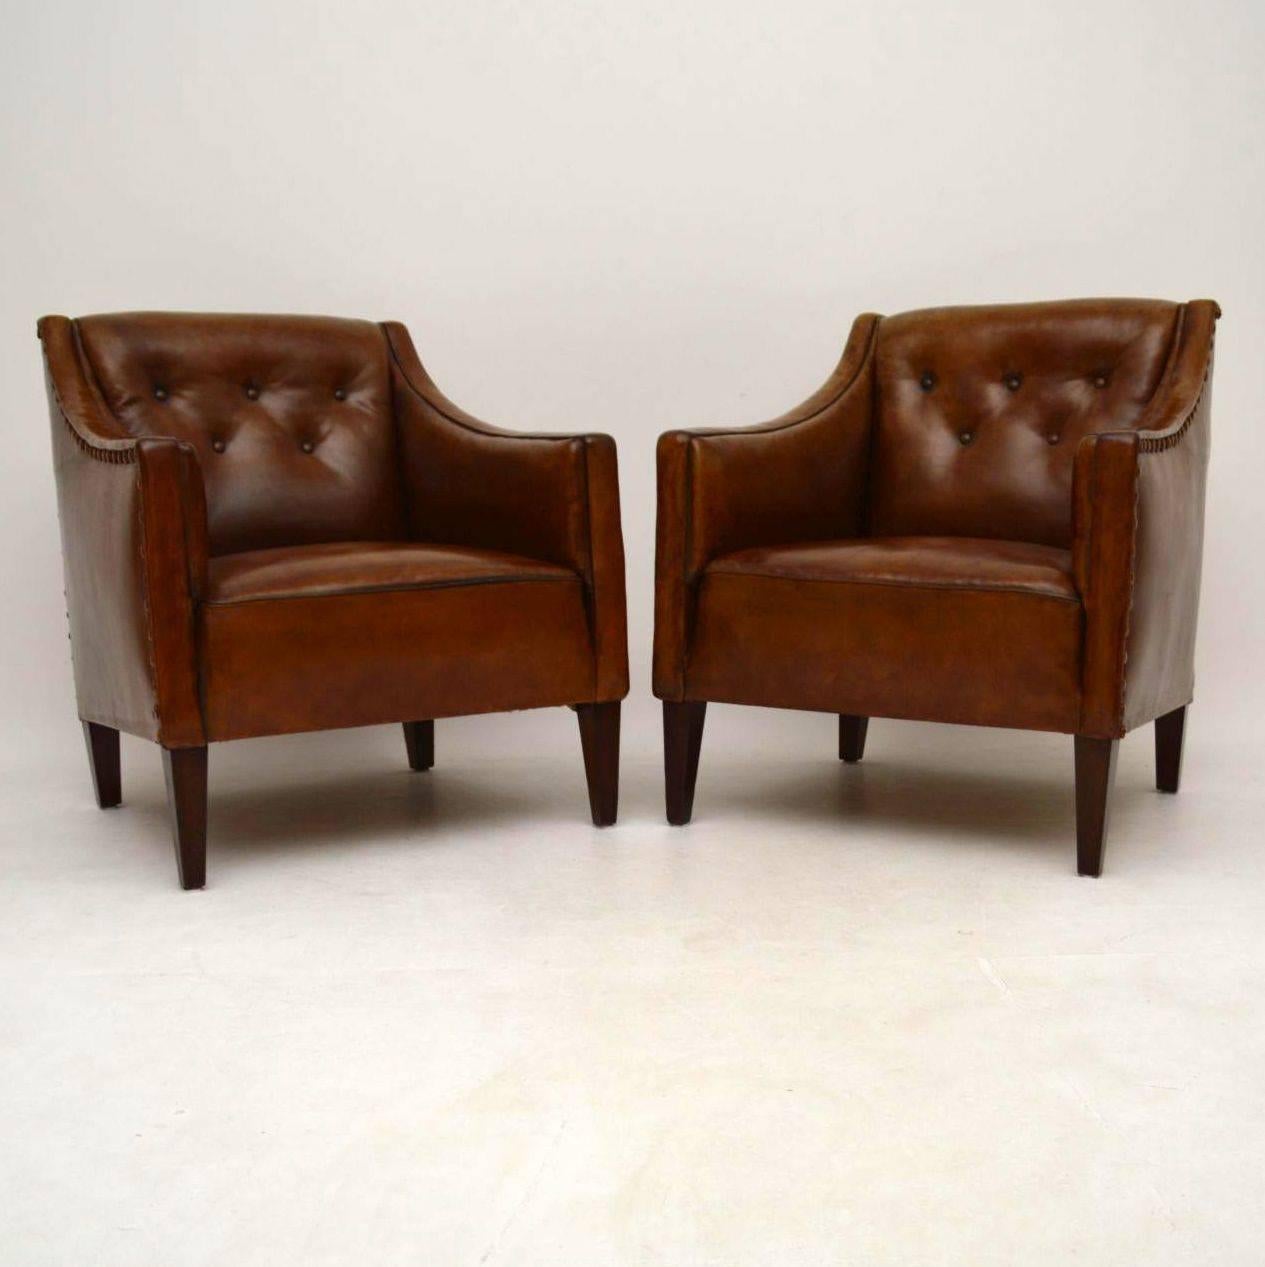 Stunning pair of antique Swedish leather armchairs in great condition dating to around the 1890-1910 period. The leather upholstery is all original, full of character and the color is magnificent. There are no holes, tears or splits to the leather